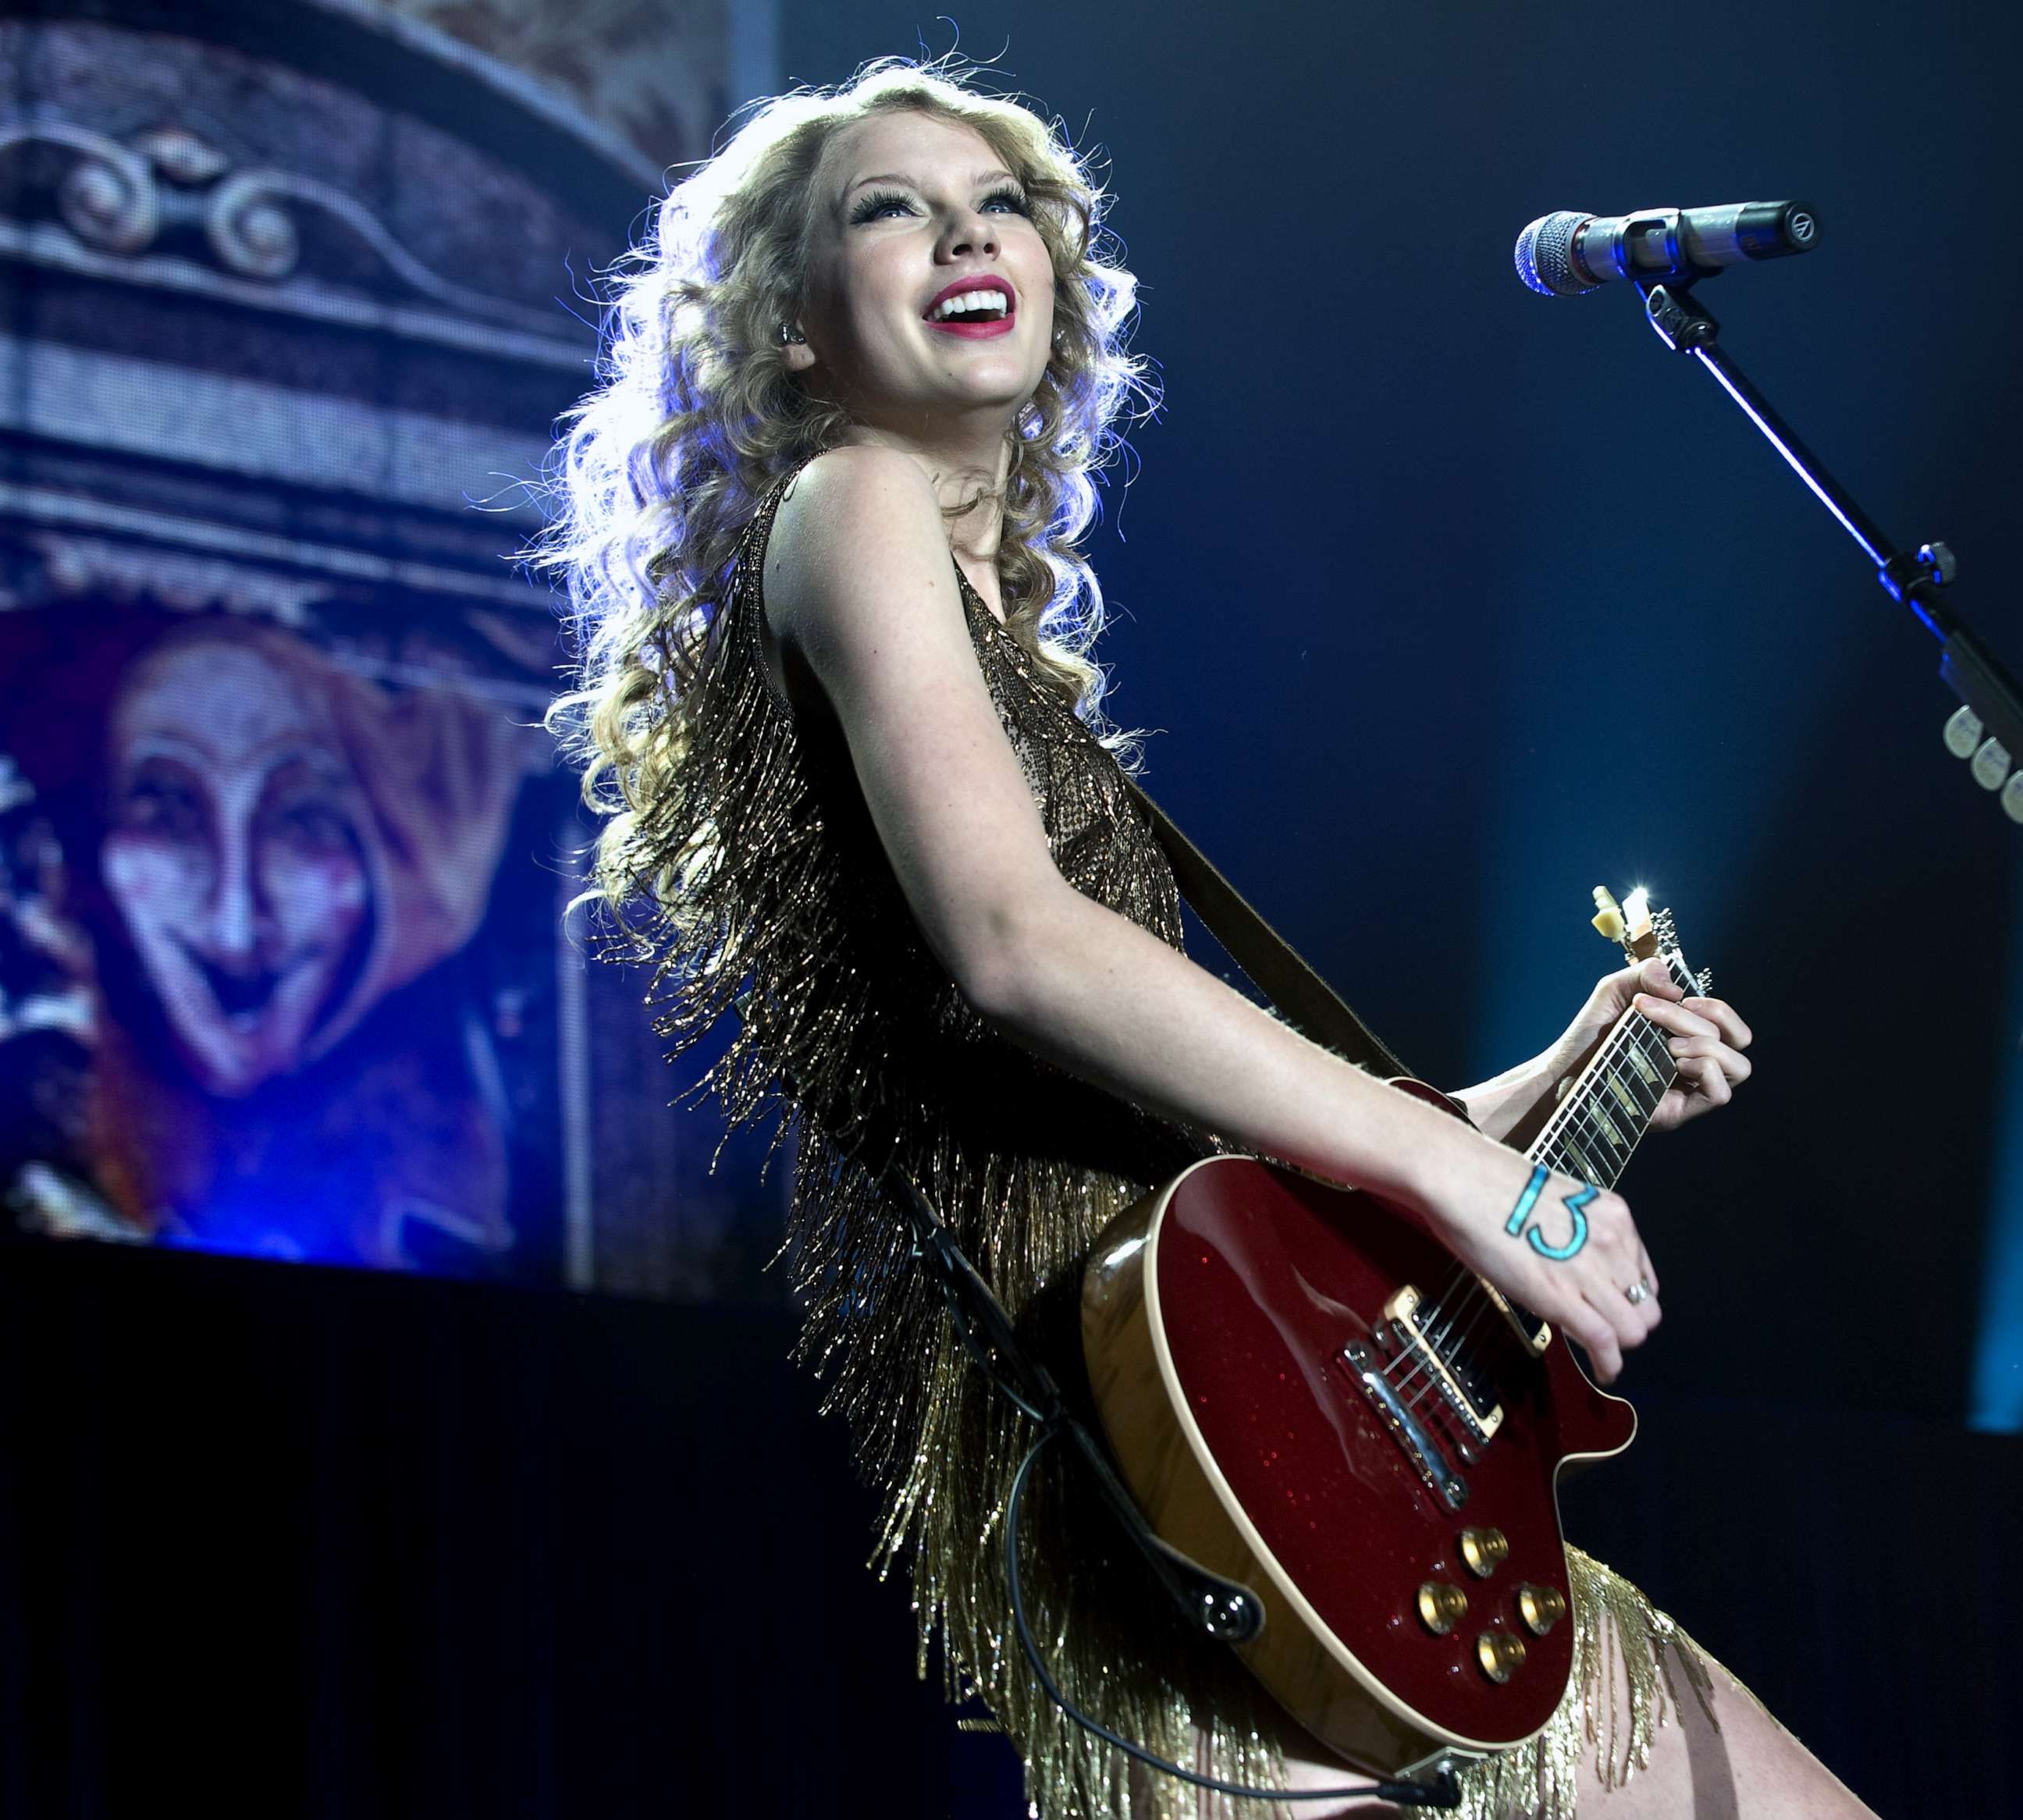 PHOTO: Singer Taylor Swift performs live on stage at Ahoy in Rotterdam, Netherlands during her Speak Now World Tour on 7th March 2011.